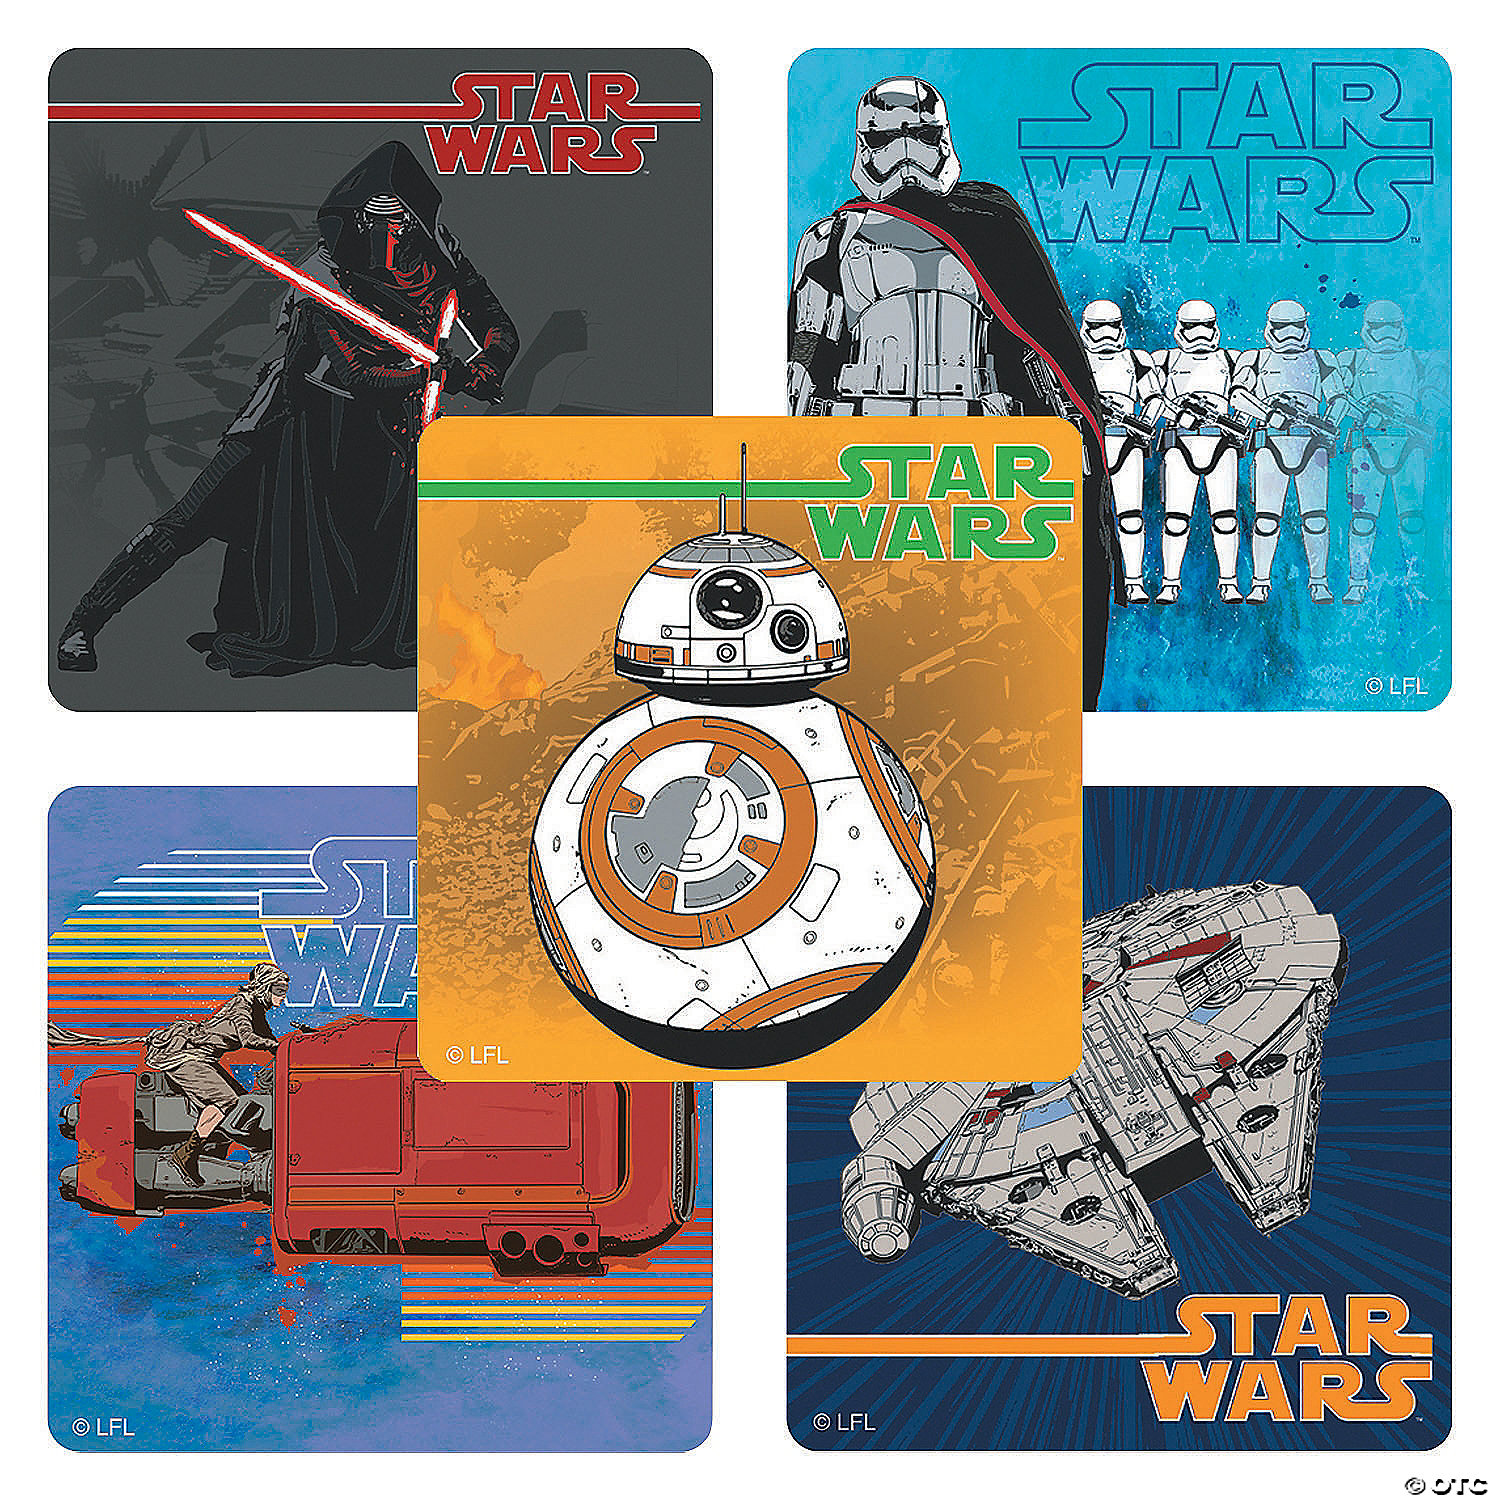 Star Wars Stickers Includes Stickers From The Force Awakens Plus A Free Album